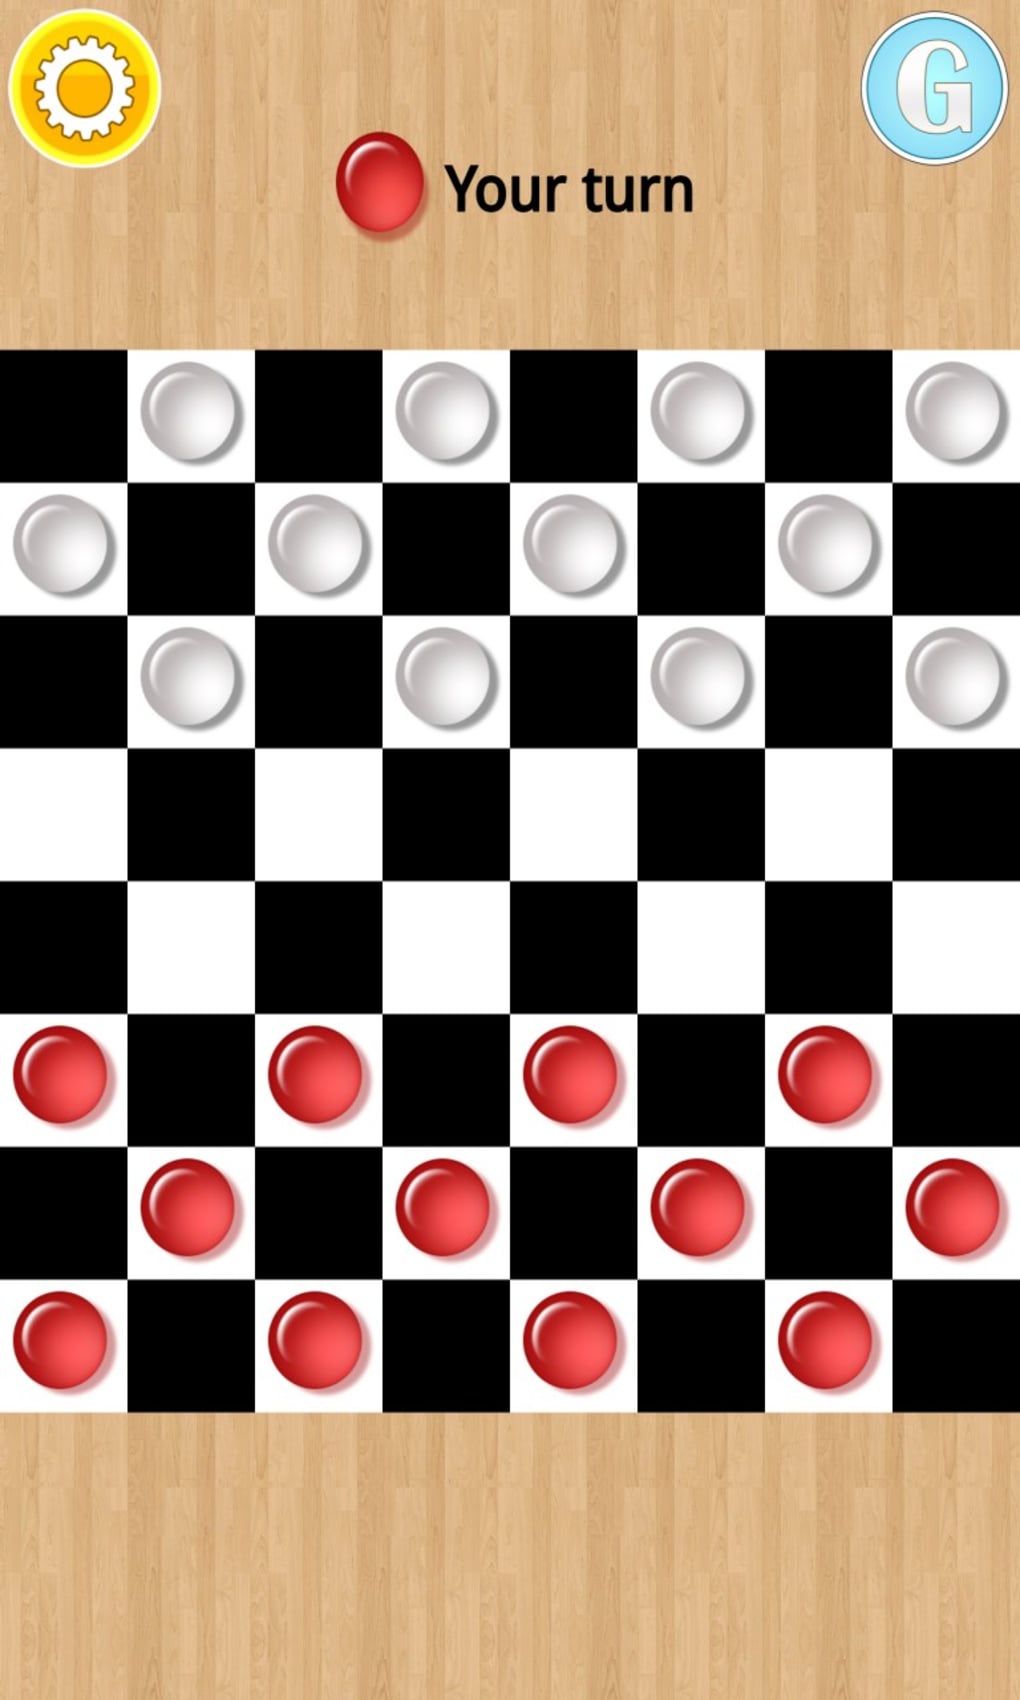 Checkers ! instaling